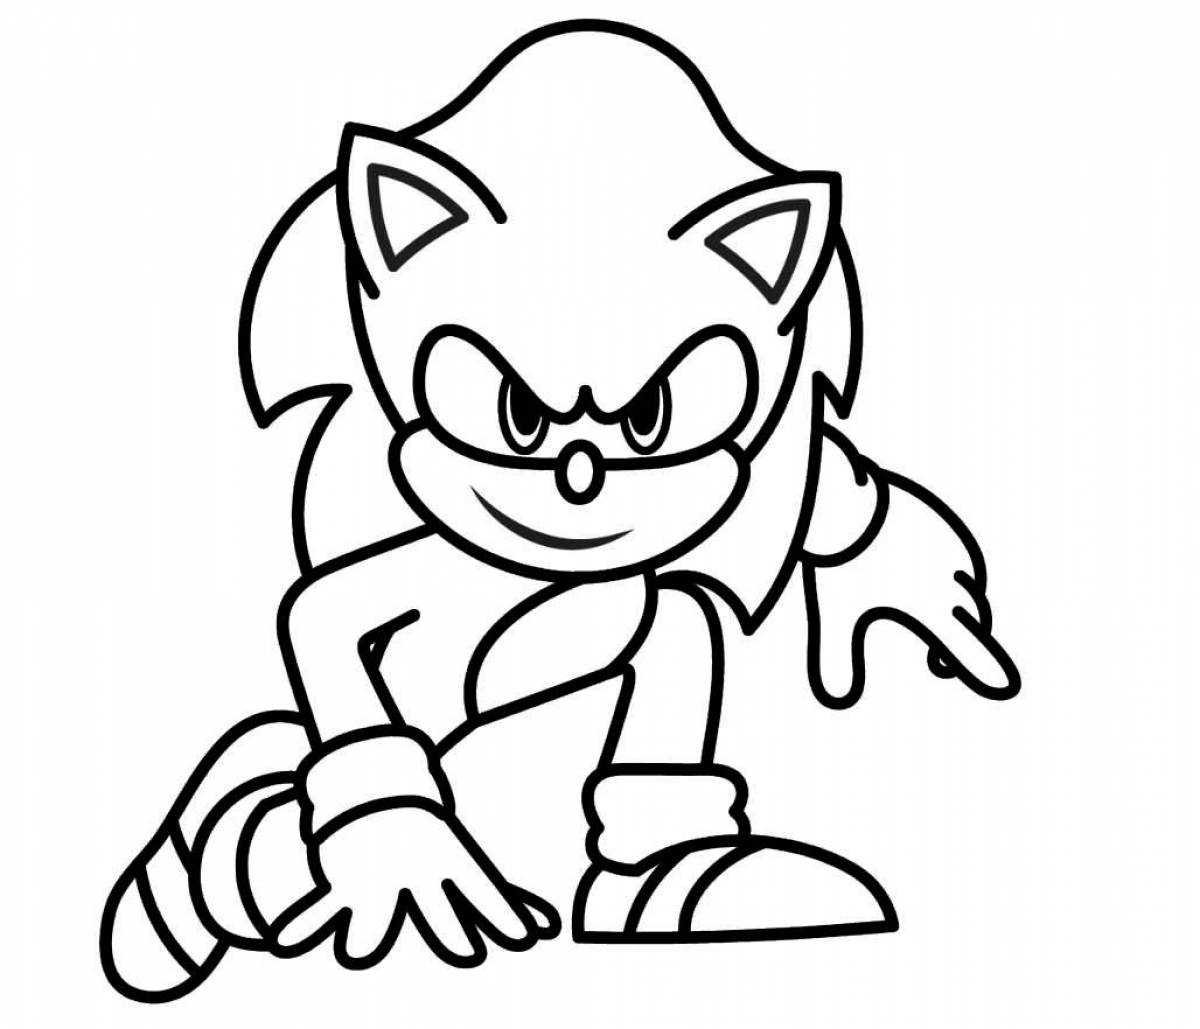 Outstanding sonic coloring book for kids